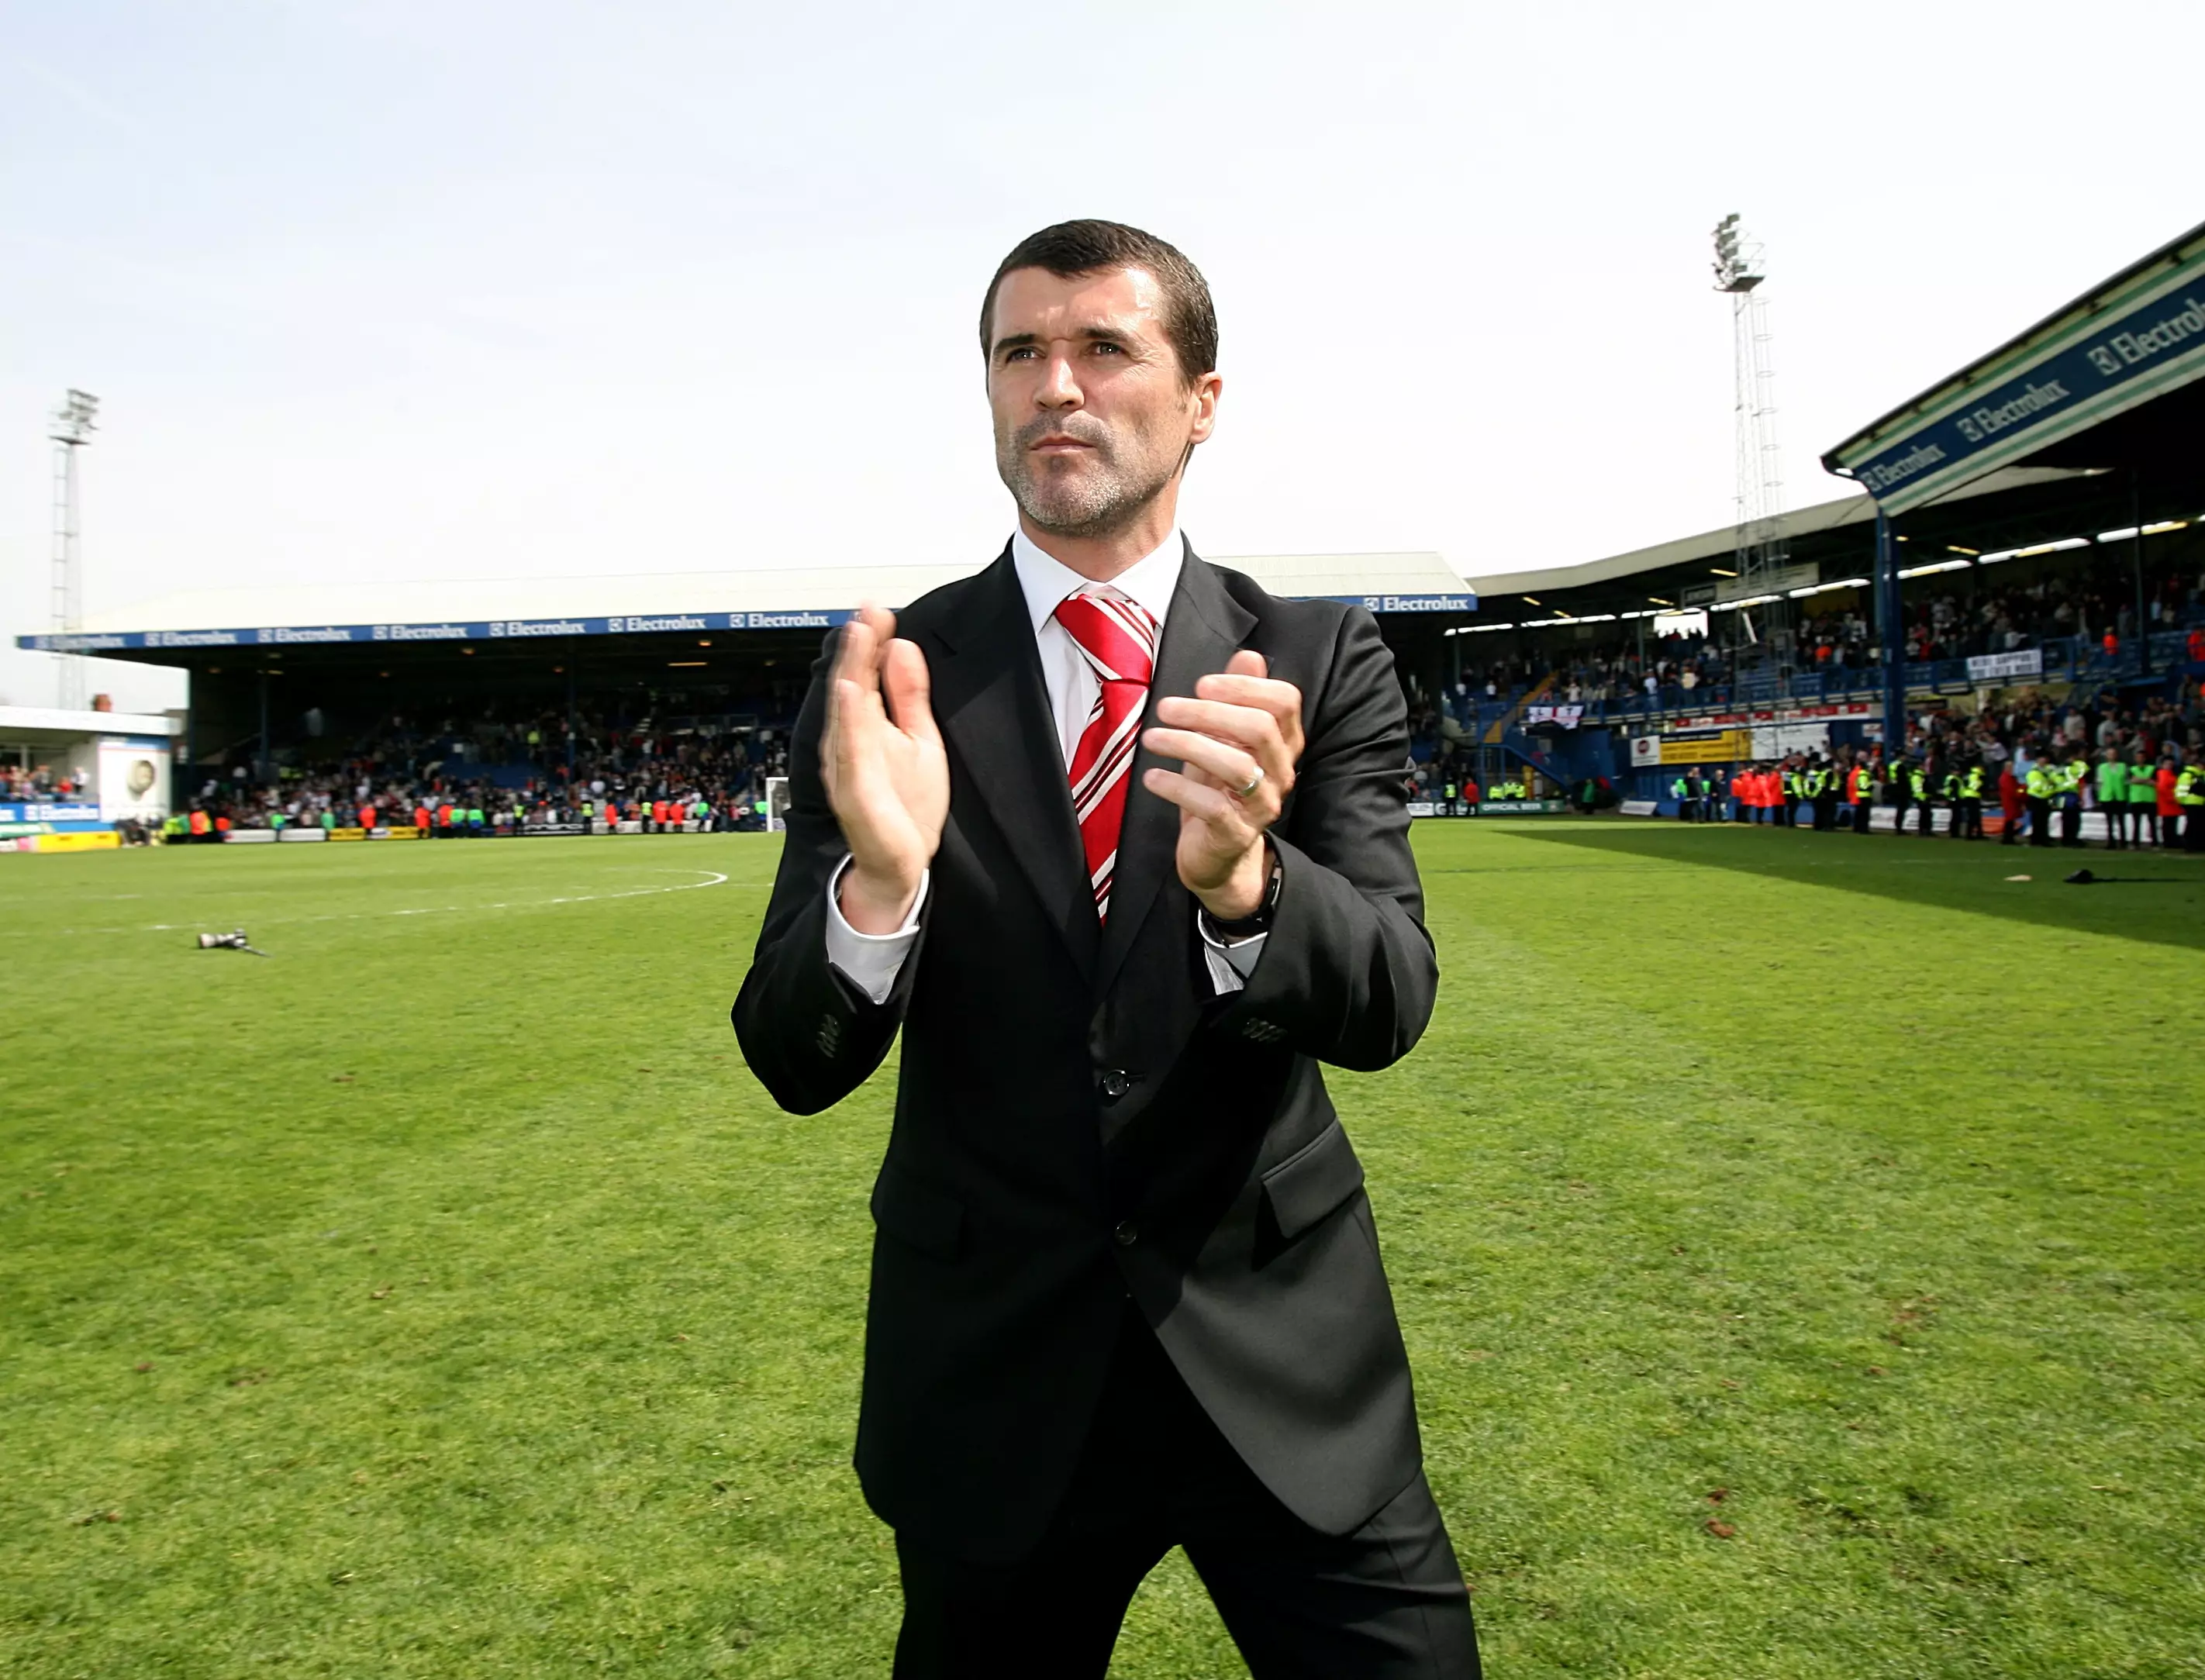 Keane applauds the fans after winning the Championship title with Sunderland. Image: PA Images